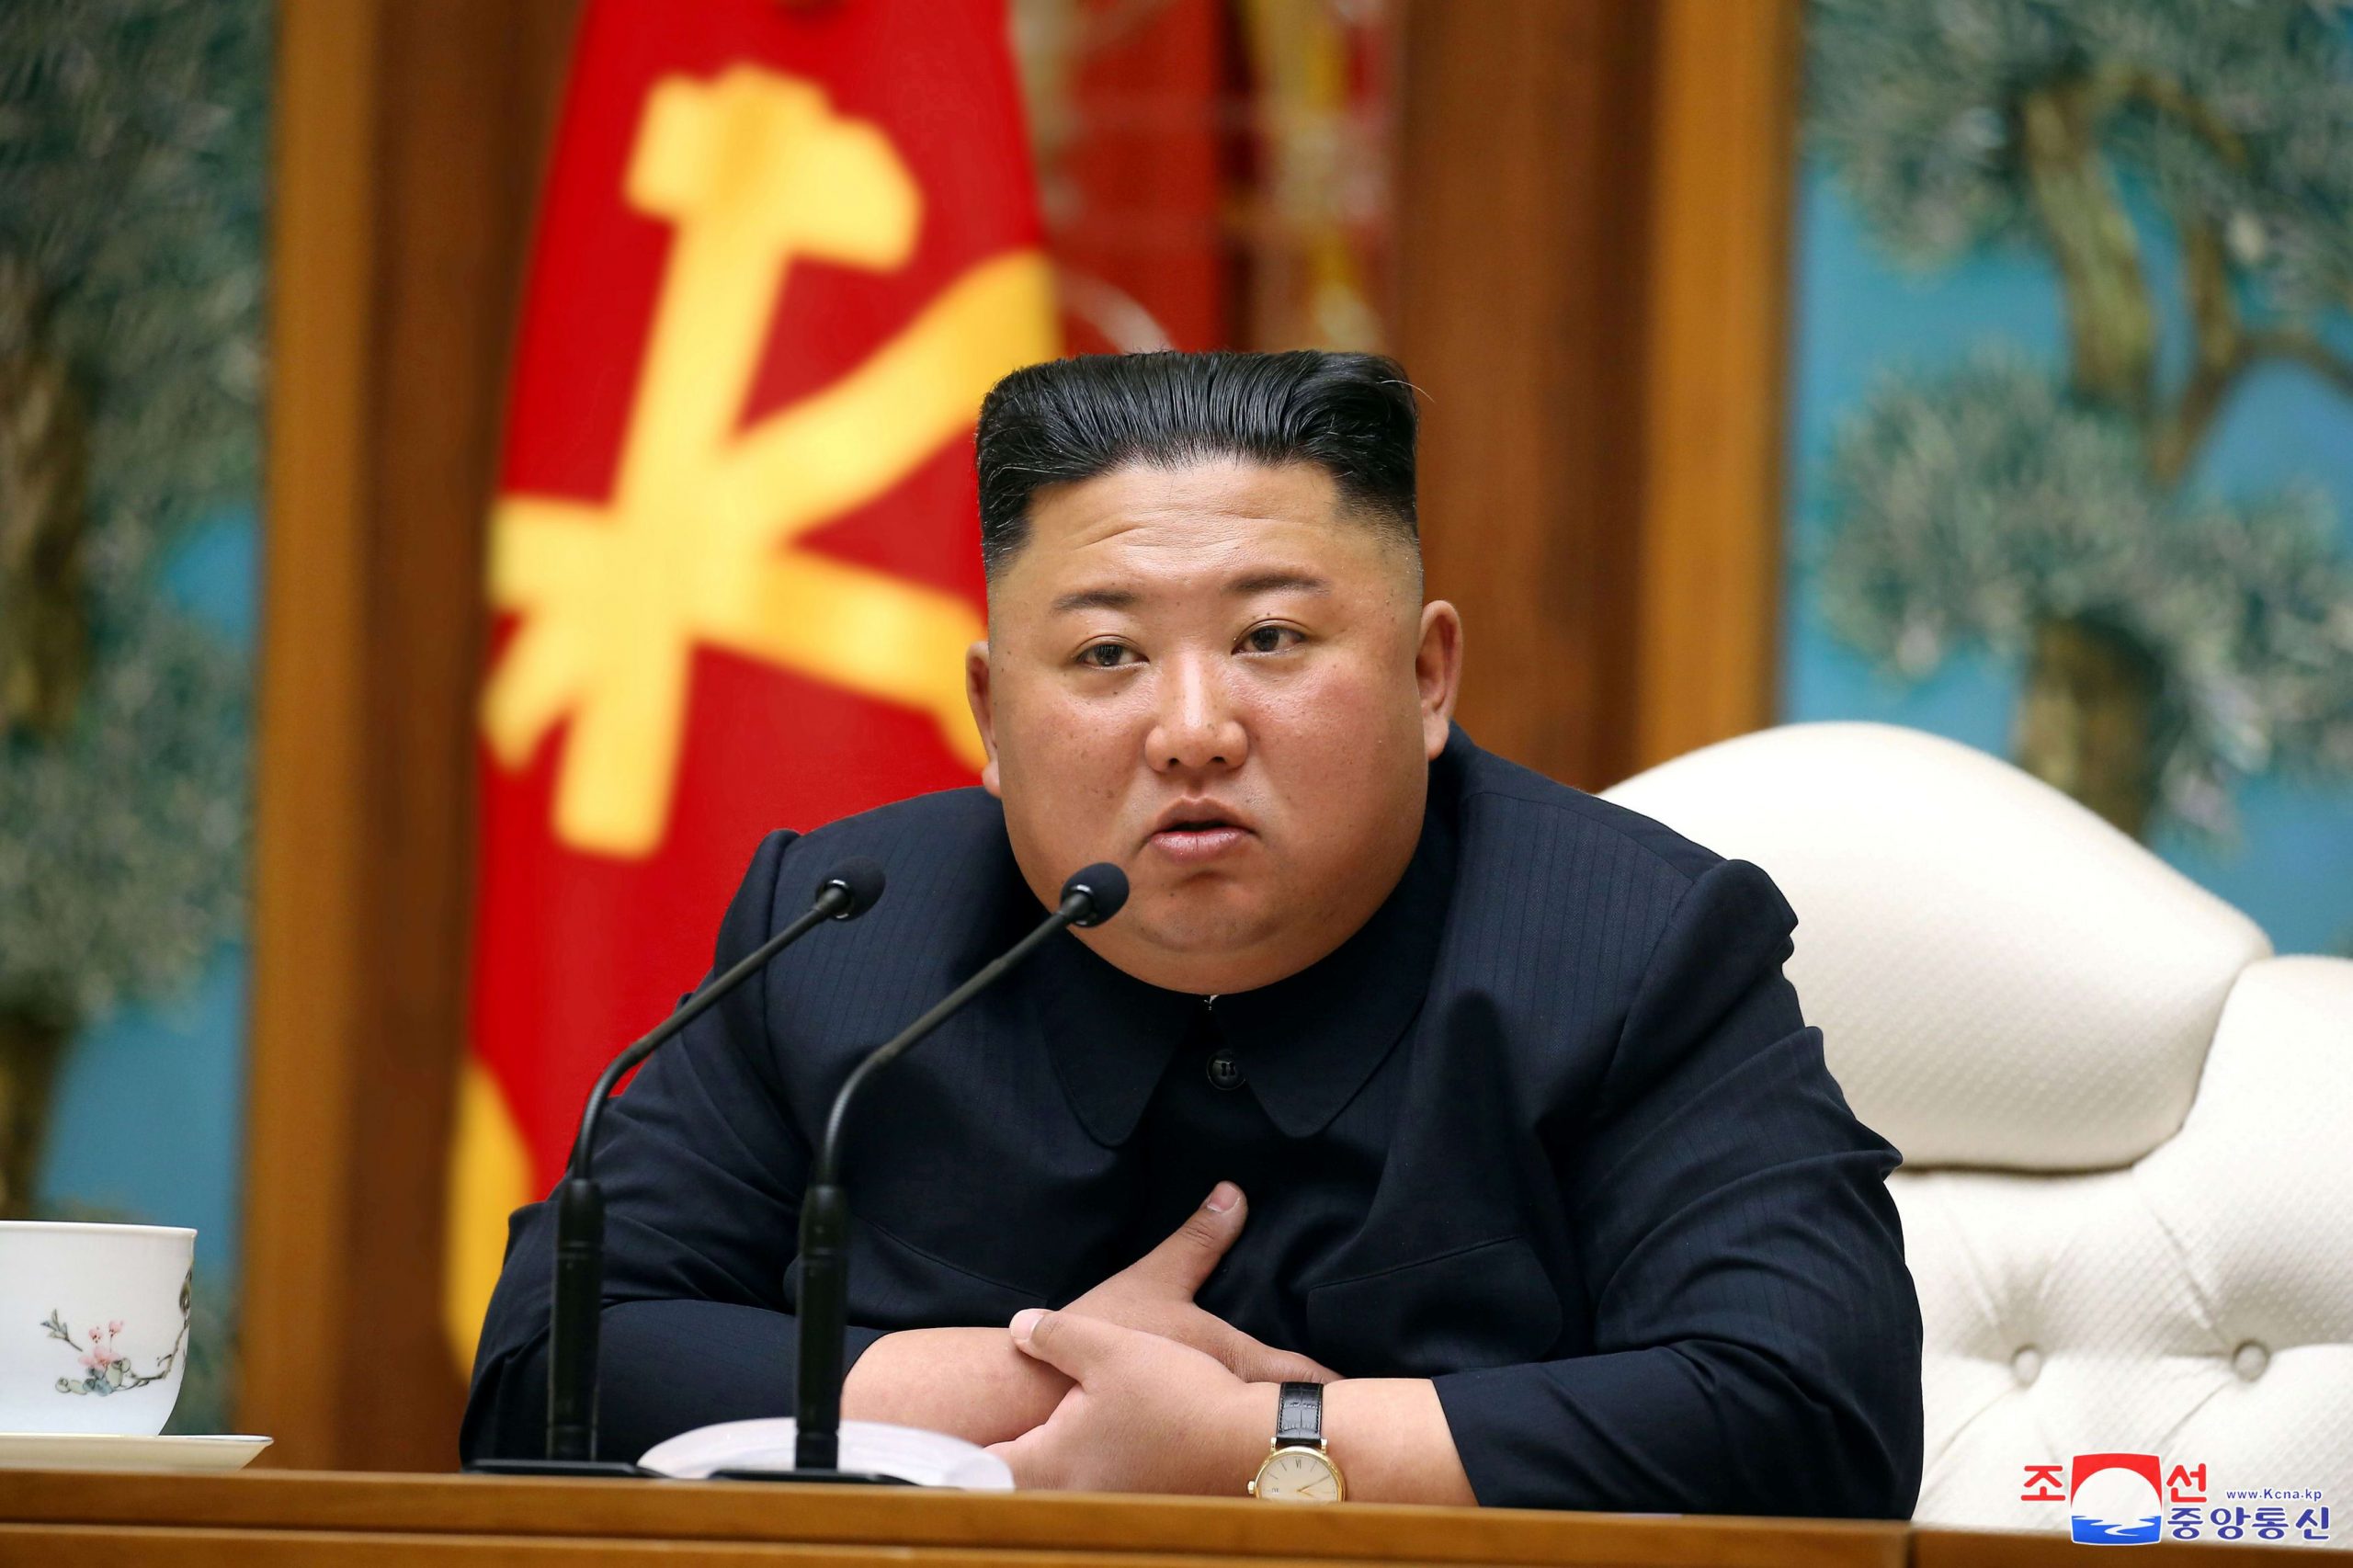 China sent team including medical experts to advise on North Korea’s Kim